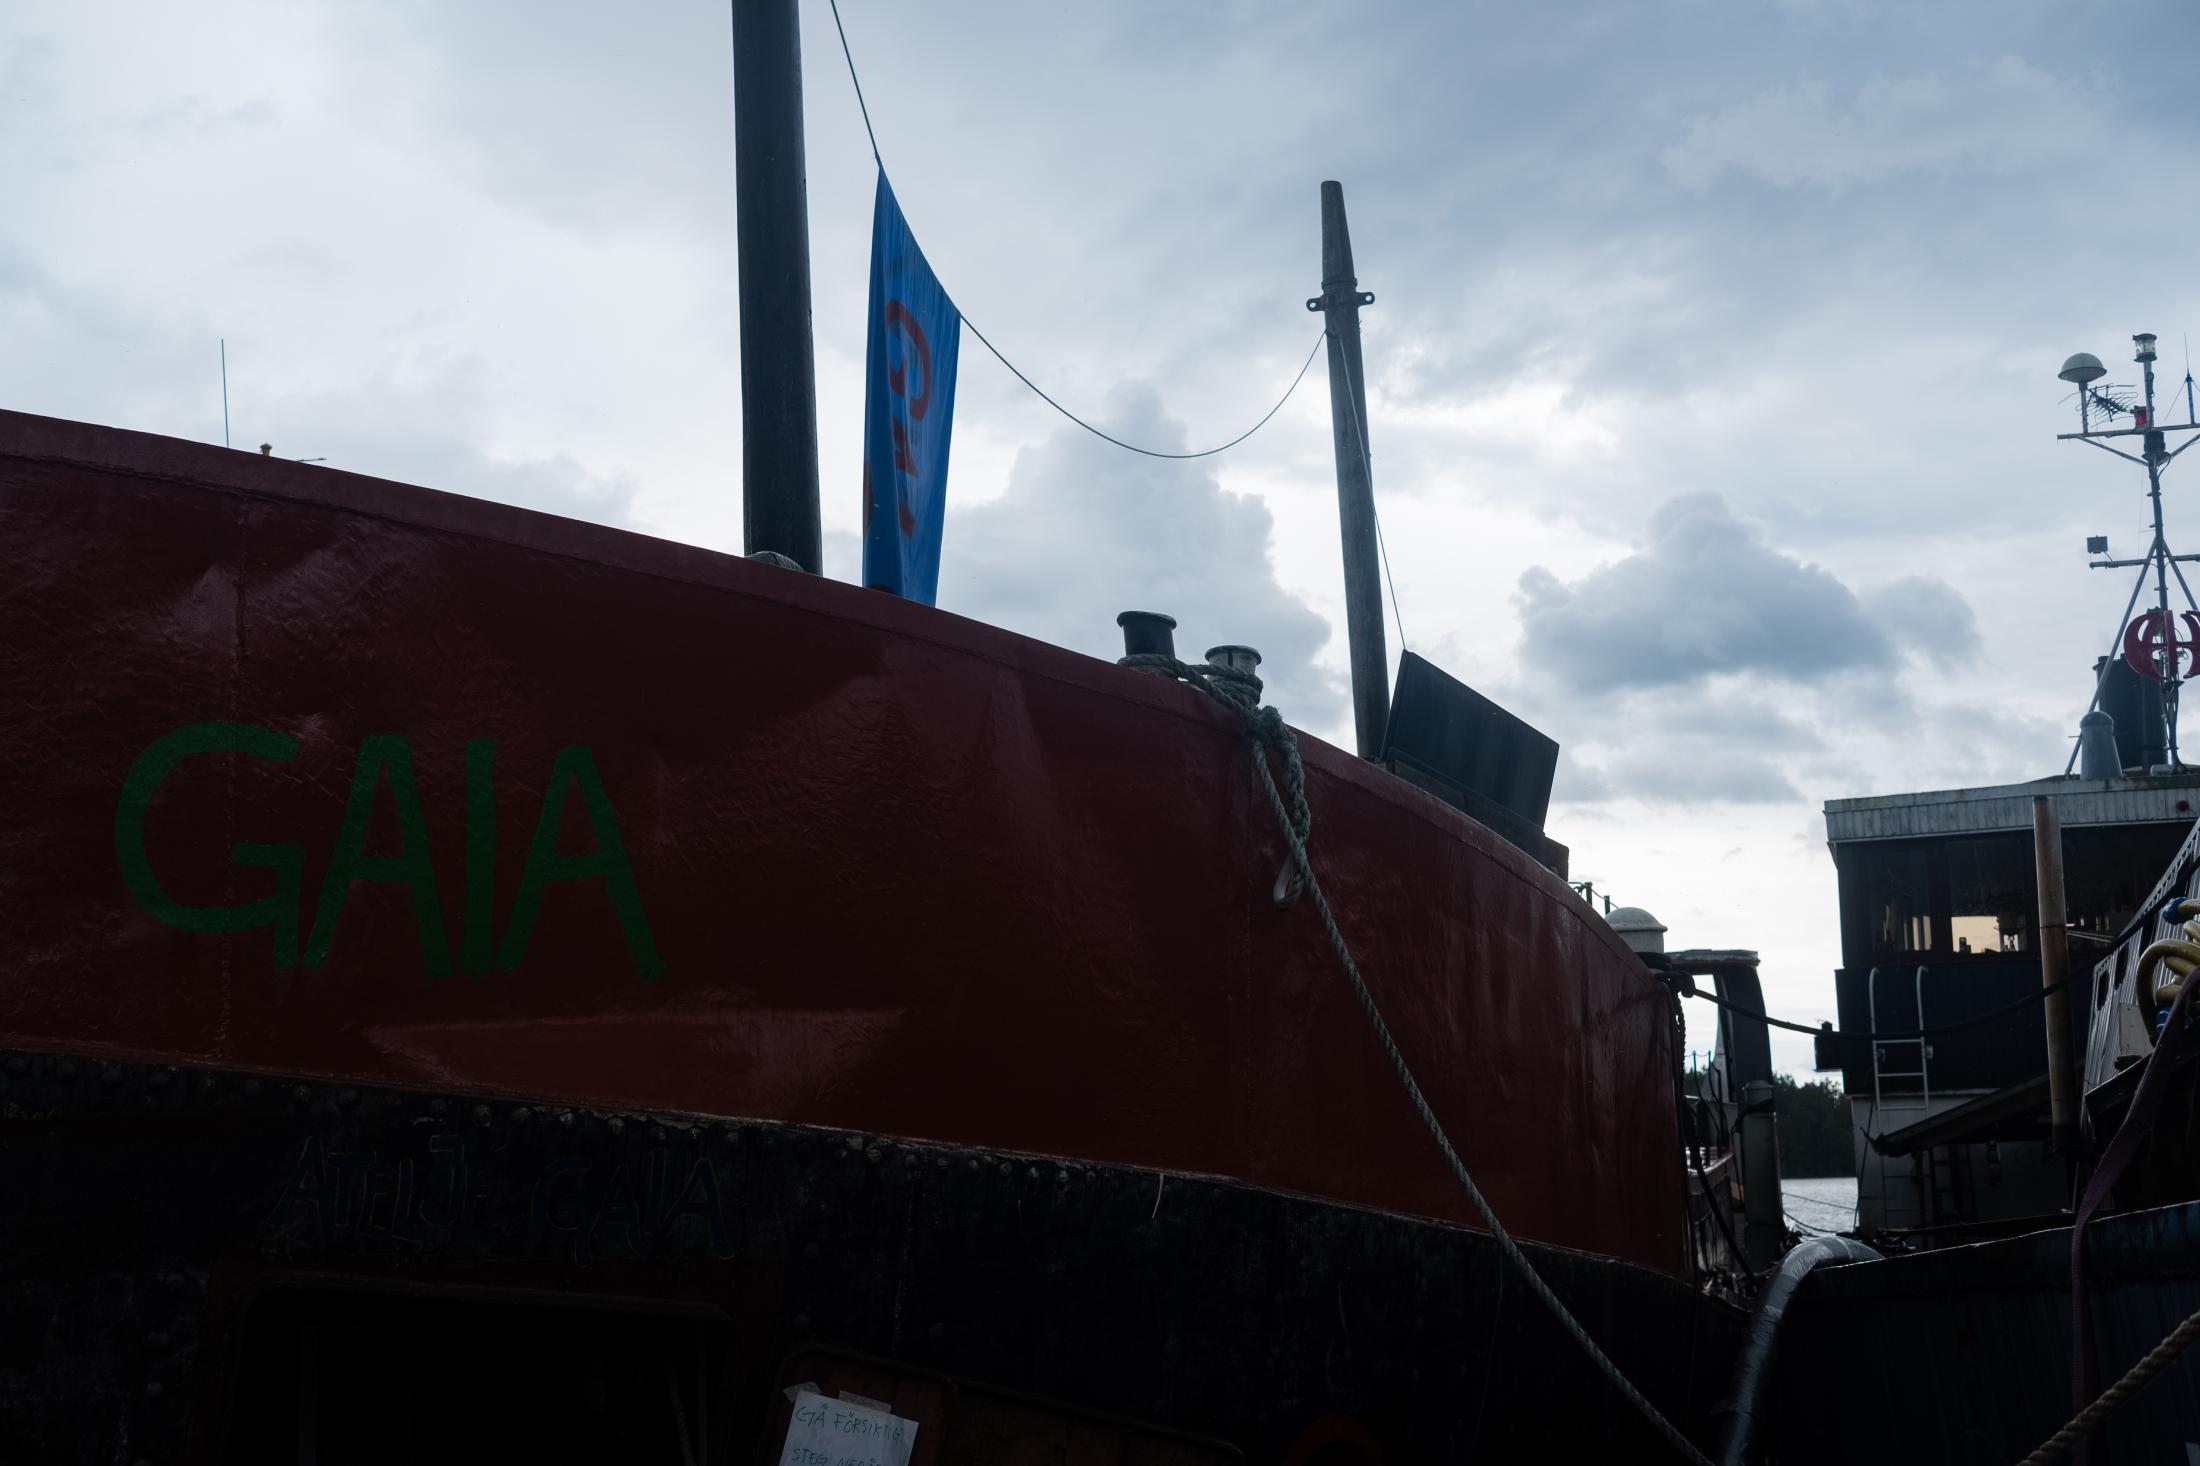 Where will Artists live? - She named it Gaia from the goddess of Earth, as this boat...